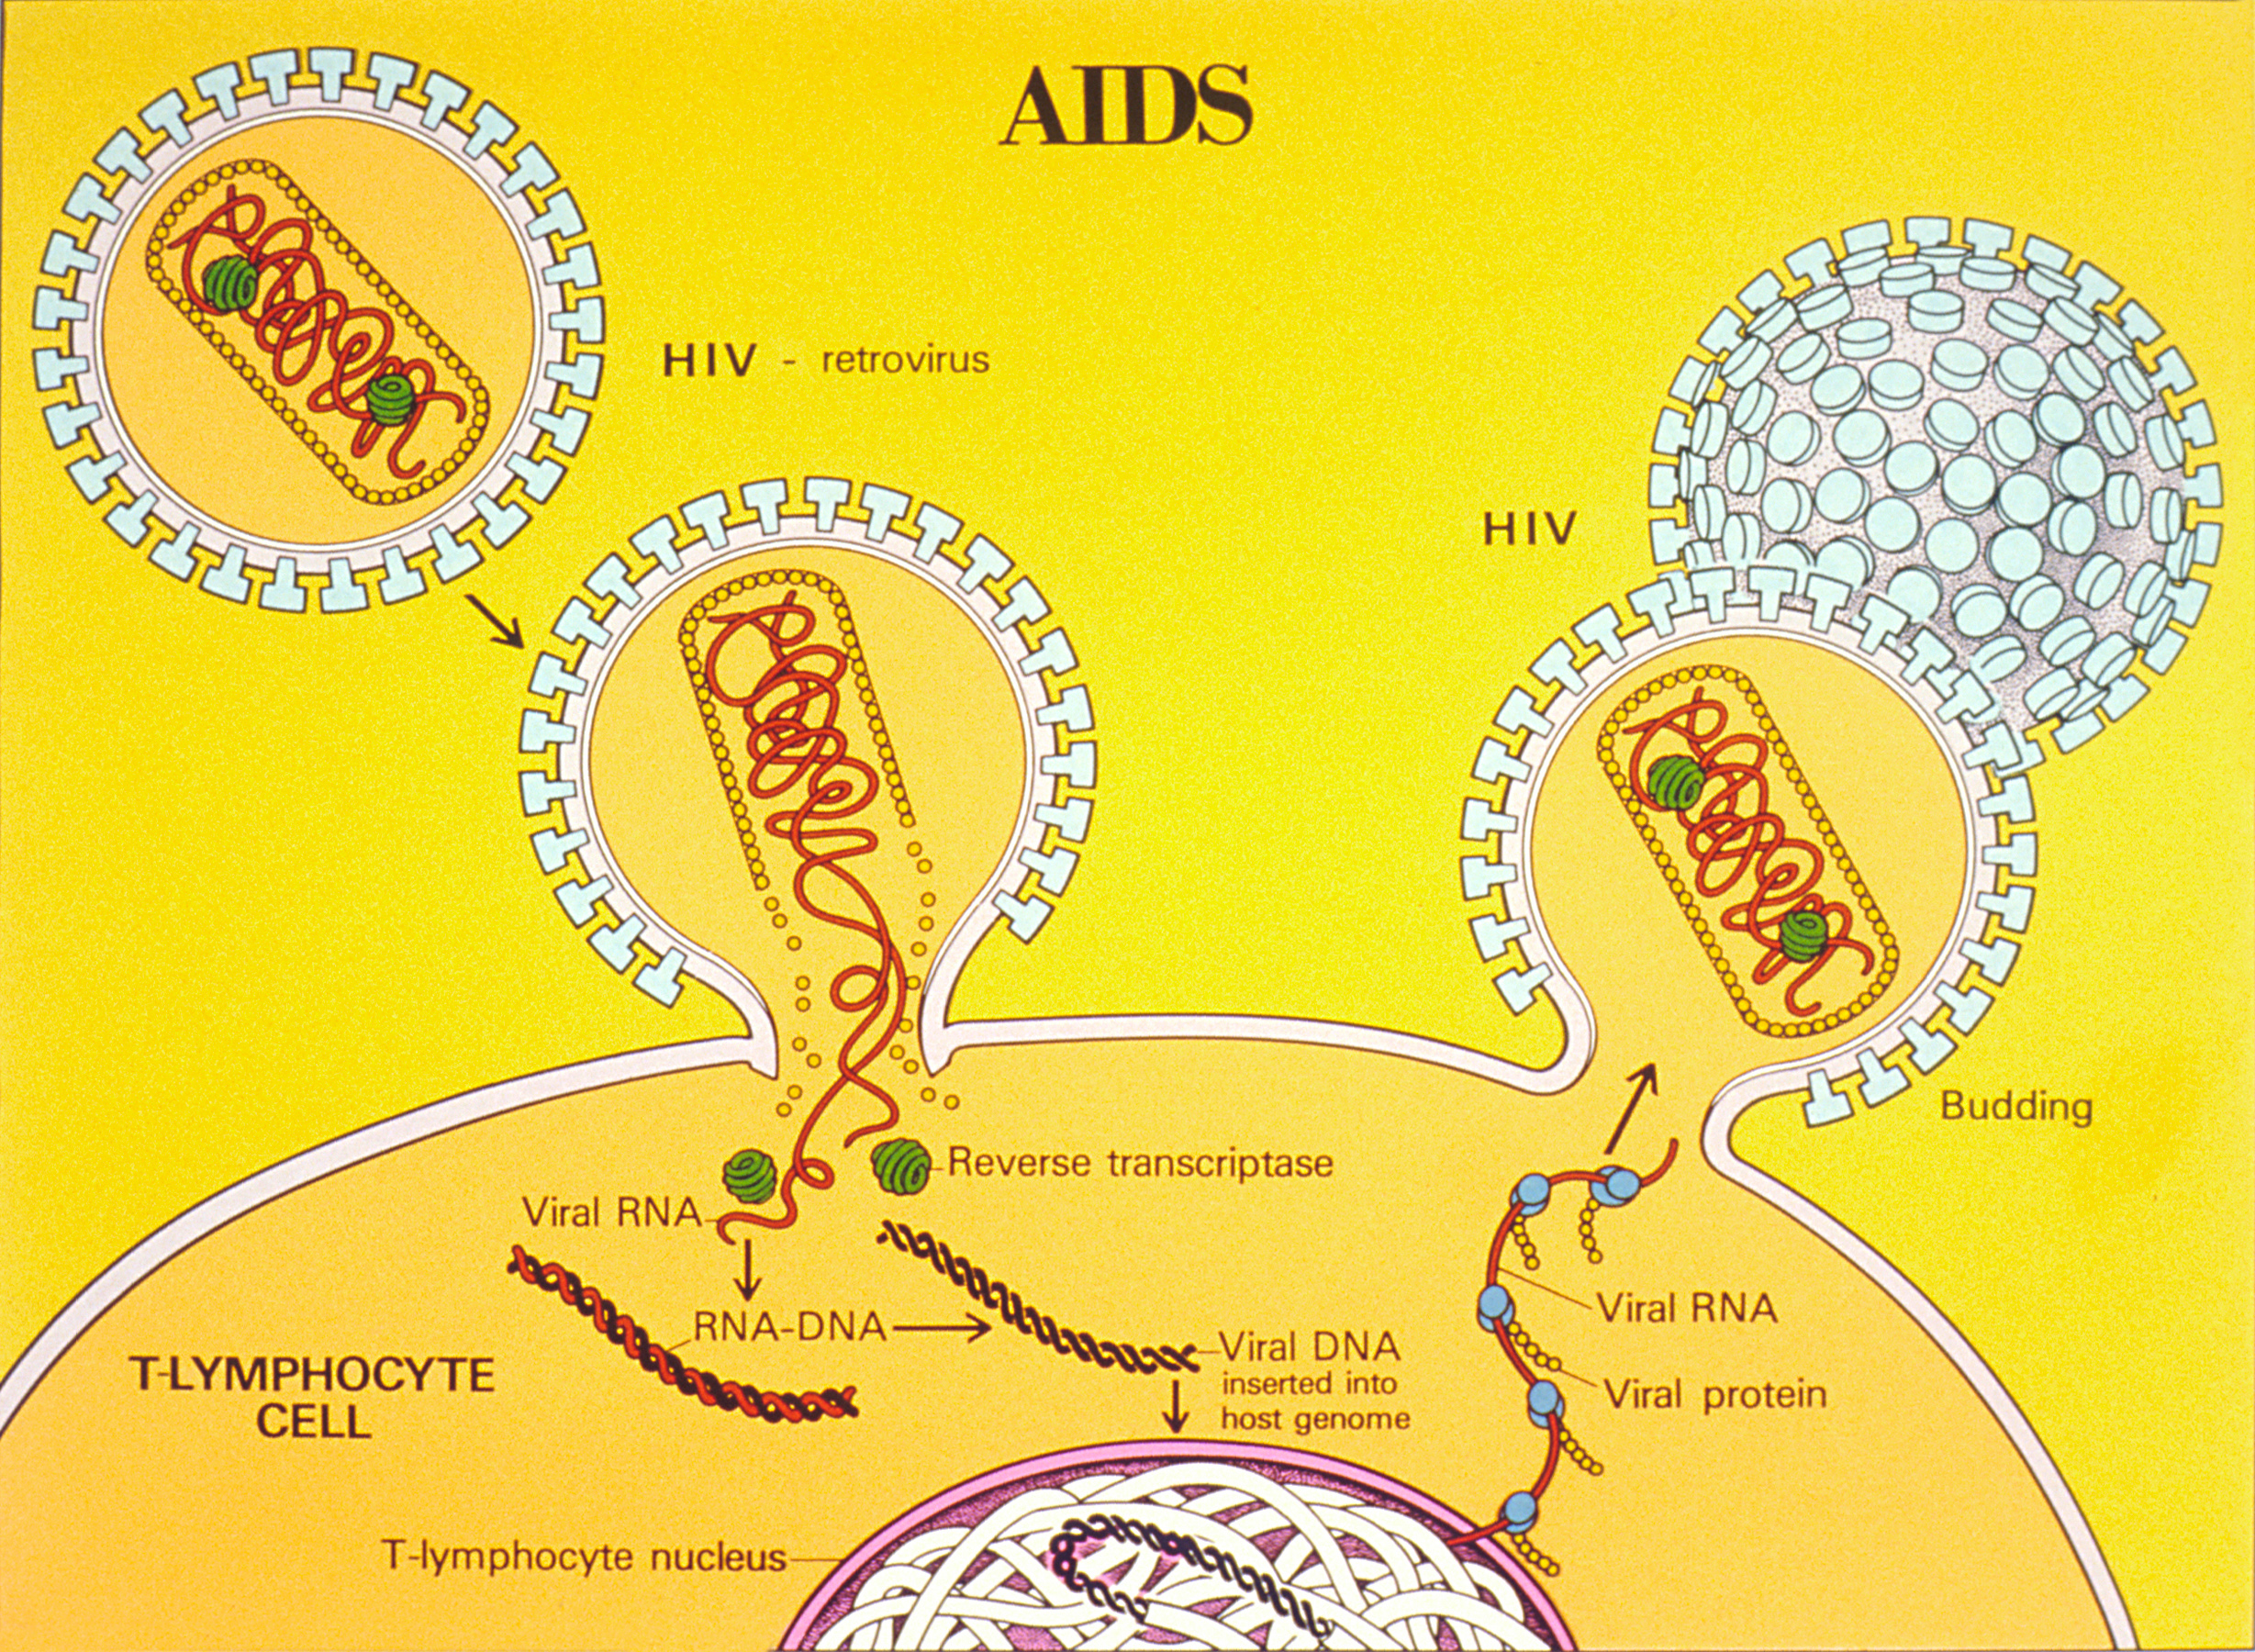 AIDS life cycle illustration